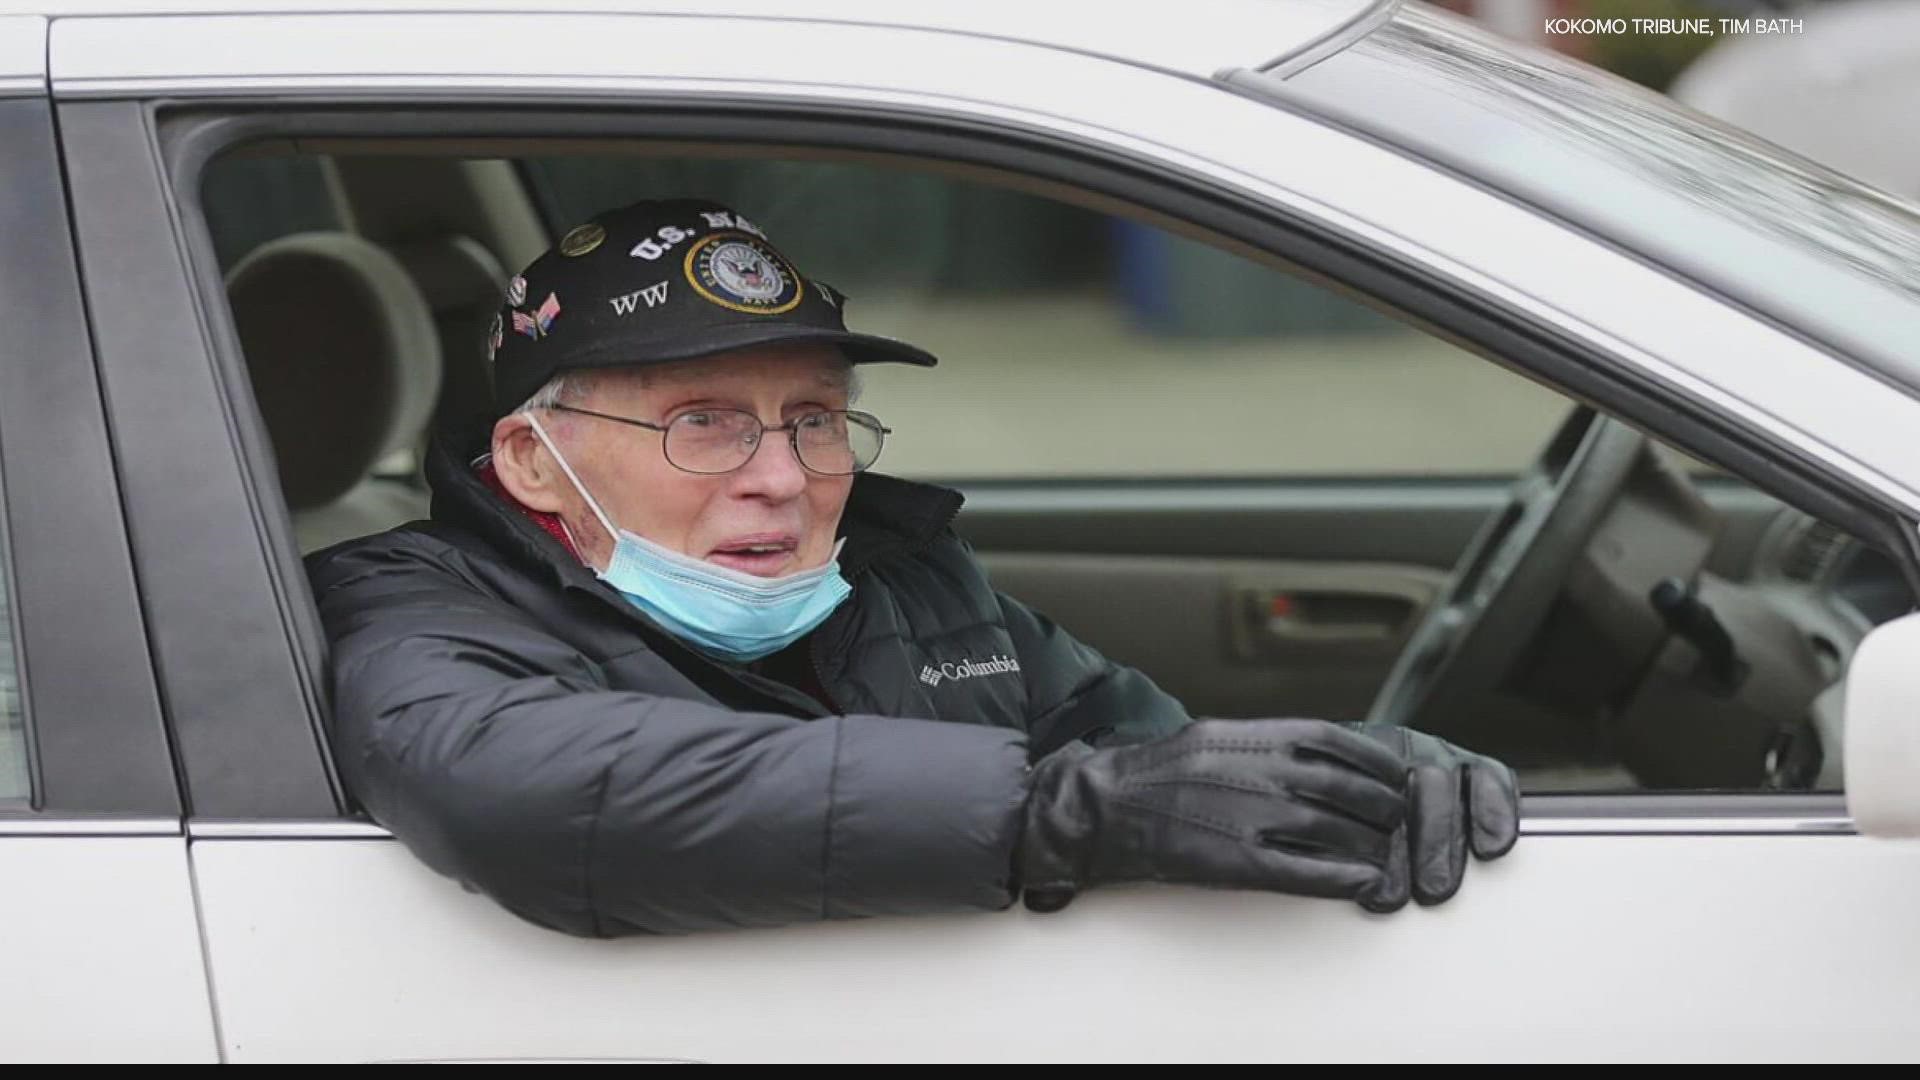 The city of Kokomo celebrated the 95th birthday of a World War II veteran with a parade of police cars, fire trucks and other vehicles carrying American flags.